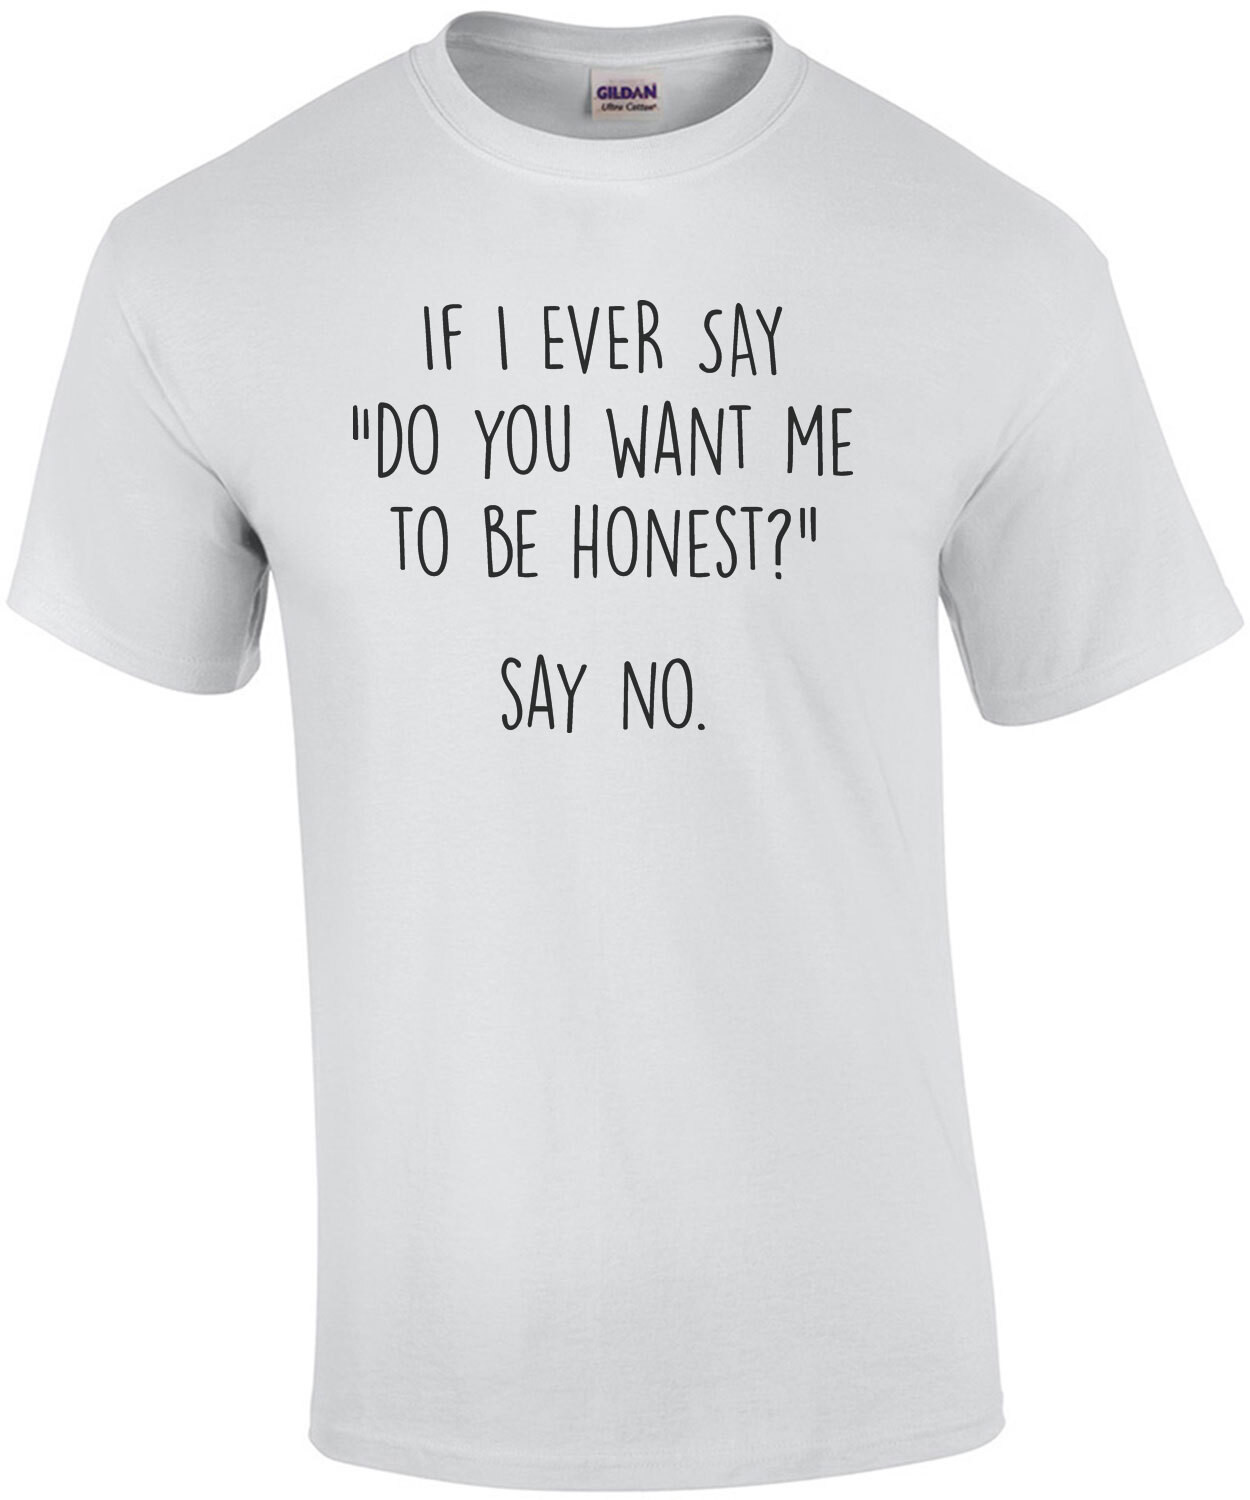 If I ever say "do you want me to be honest?" say no. funny sarcastic t-shirt